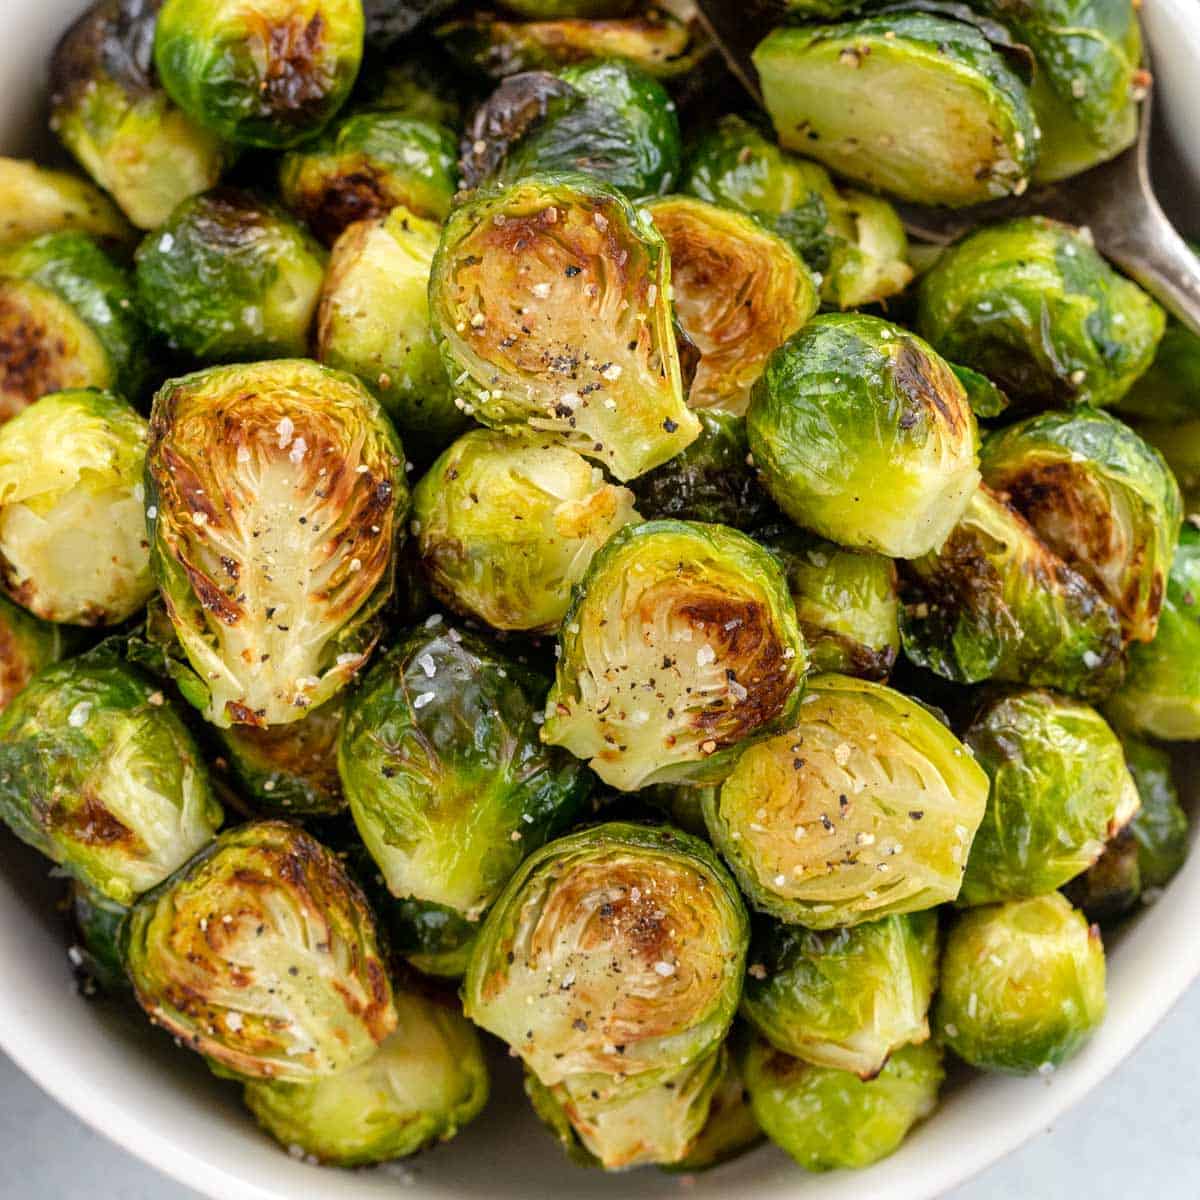 "Give Brussels Sprouts a Chance: The Gut-Healthy Superfood You've Been Overlooking"